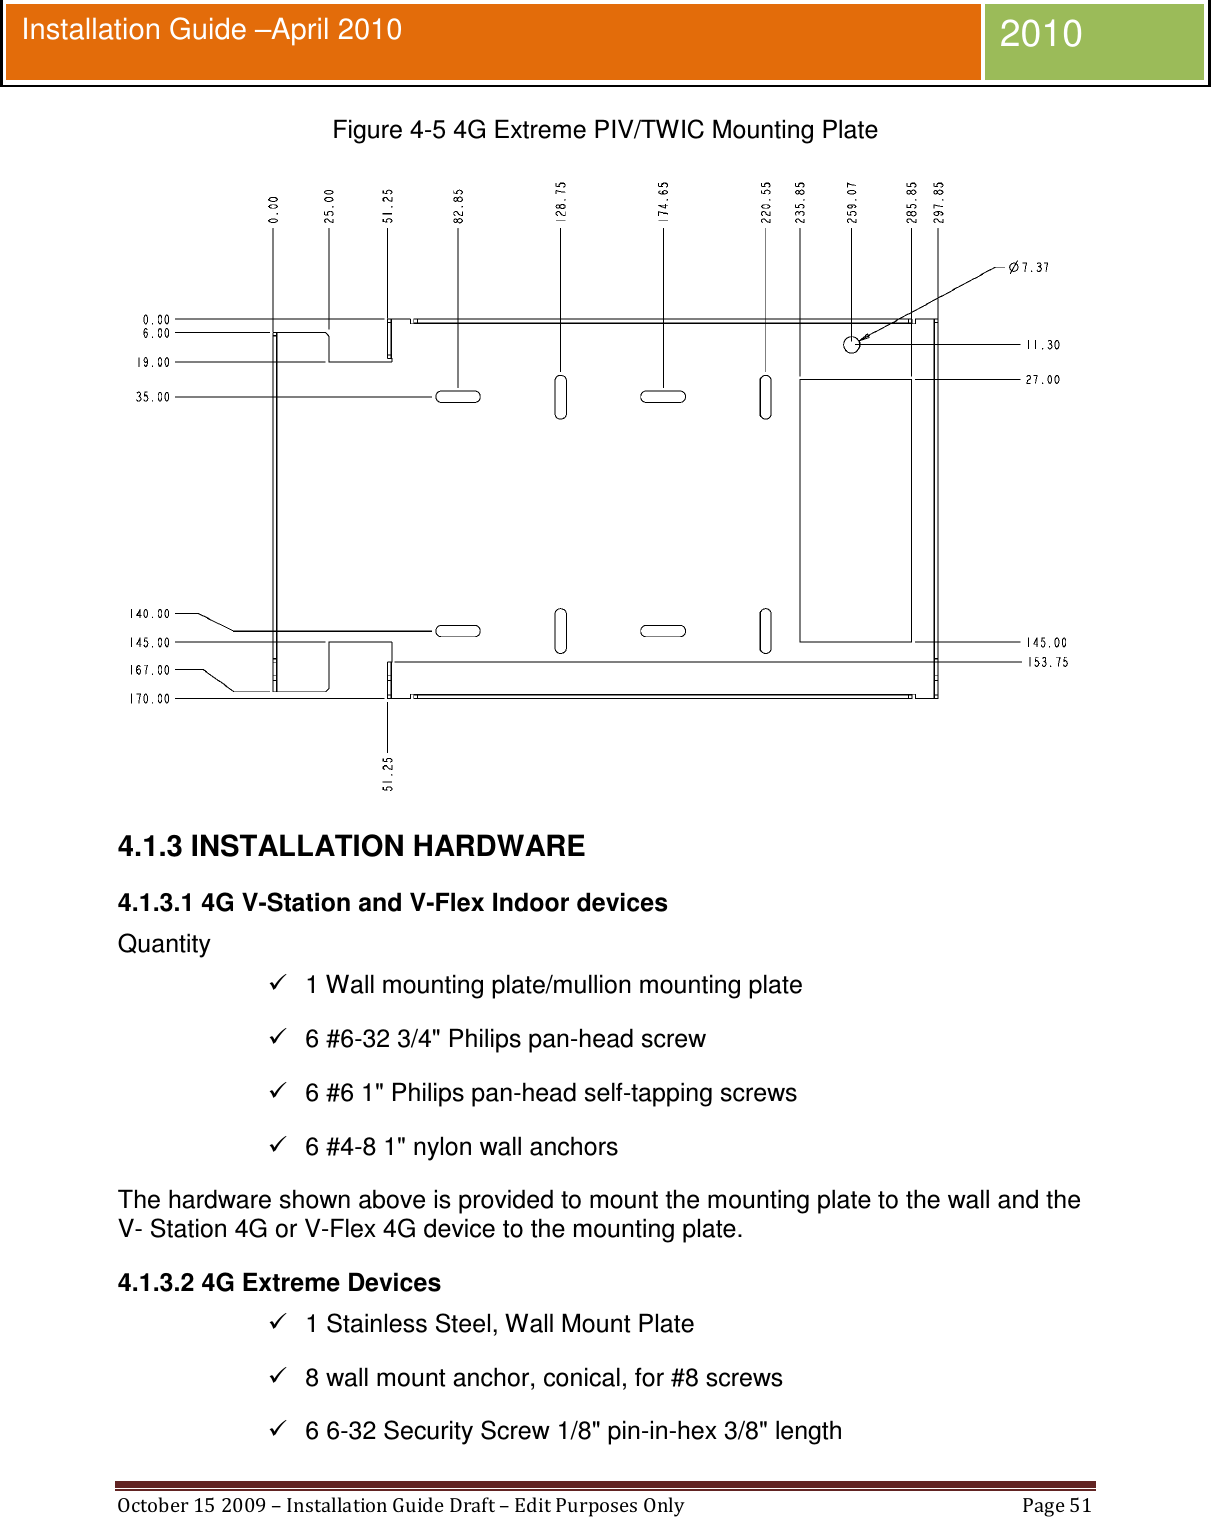  October 15 2009 – Installation Guide Draft – Edit Purposes Only  Page 51  Installation Guide –April 2010 2010 Figure 4-5 4G Extreme PIV/TWIC Mounting Plate  4.1.3 INSTALLATION HARDWARE 4.1.3.1 4G V-Station and V-Flex Indoor devices Quantity   1 Wall mounting plate/mullion mounting plate   6 #6-32 3/4&quot; Philips pan-head screw   6 #6 1&quot; Philips pan-head self-tapping screws   6 #4-8 1&quot; nylon wall anchors The hardware shown above is provided to mount the mounting plate to the wall and the V- Station 4G or V-Flex 4G device to the mounting plate. 4.1.3.2 4G Extreme Devices   1 Stainless Steel, Wall Mount Plate    8 wall mount anchor, conical, for #8 screws   6 6-32 Security Screw 1/8&quot; pin-in-hex 3/8&quot; length 